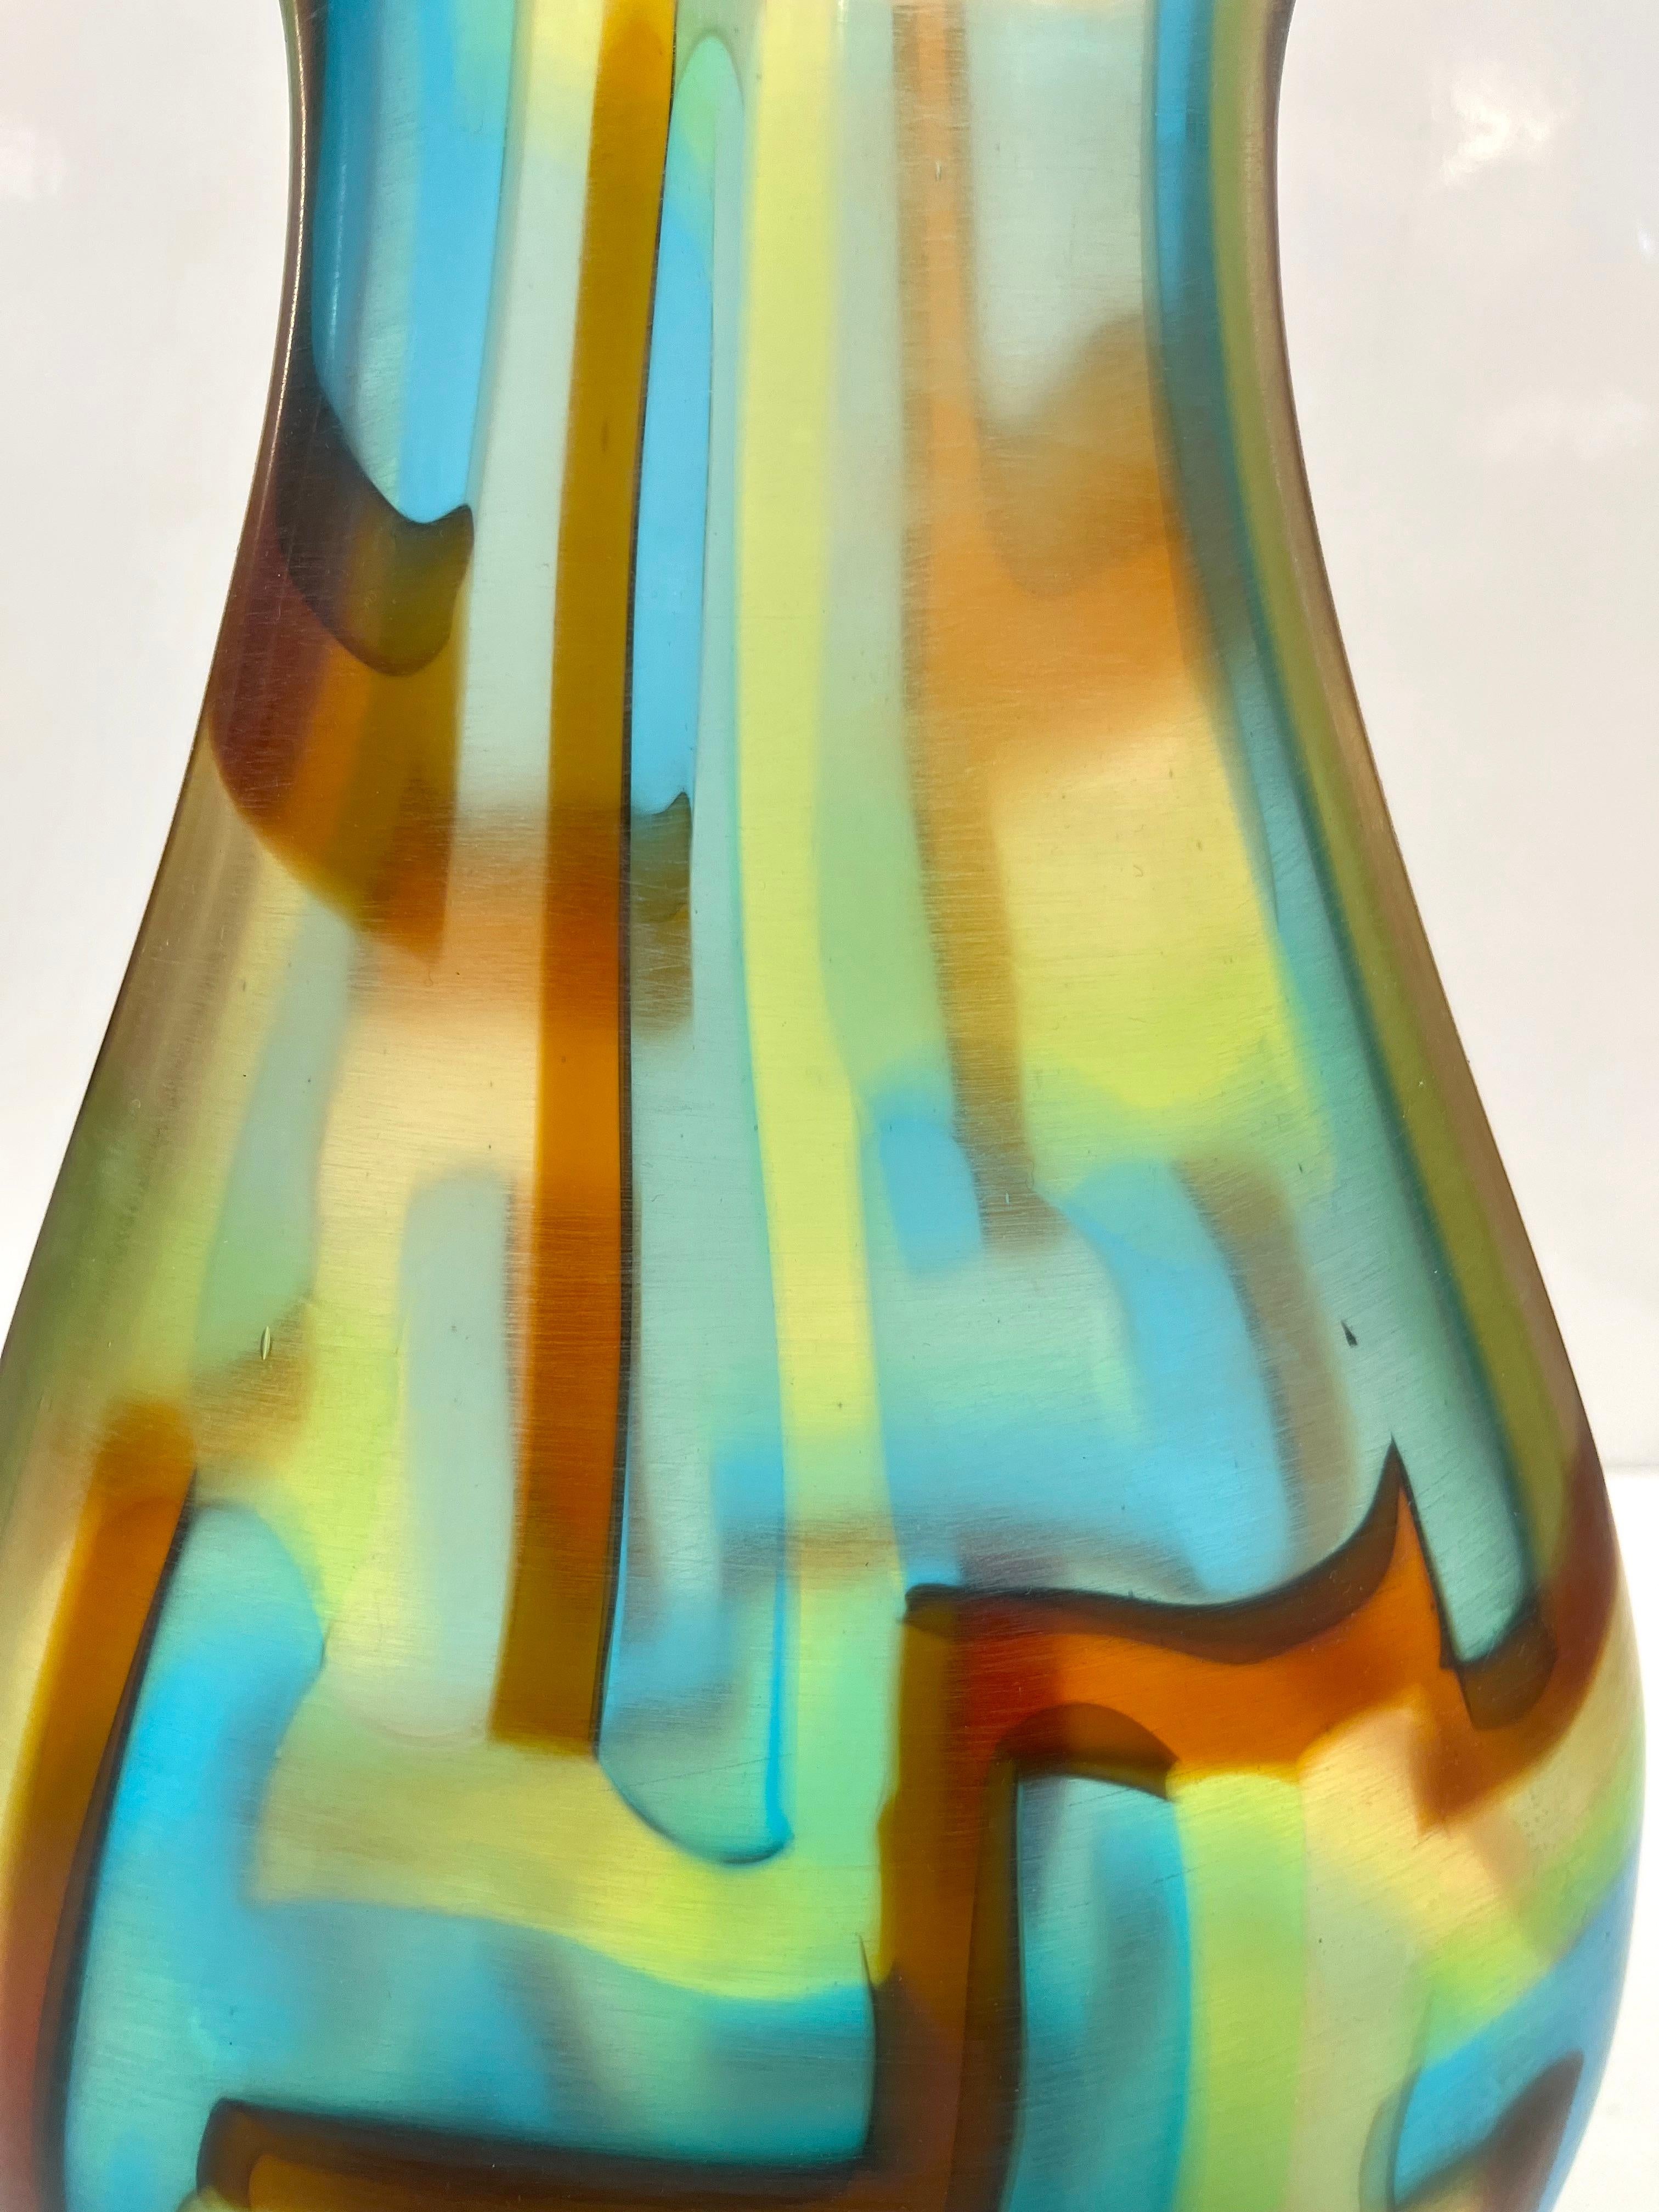 Afro Celotto Early 2000s Italian Turquoise Yellow Green Amber Murano Glass Vase For Sale 5